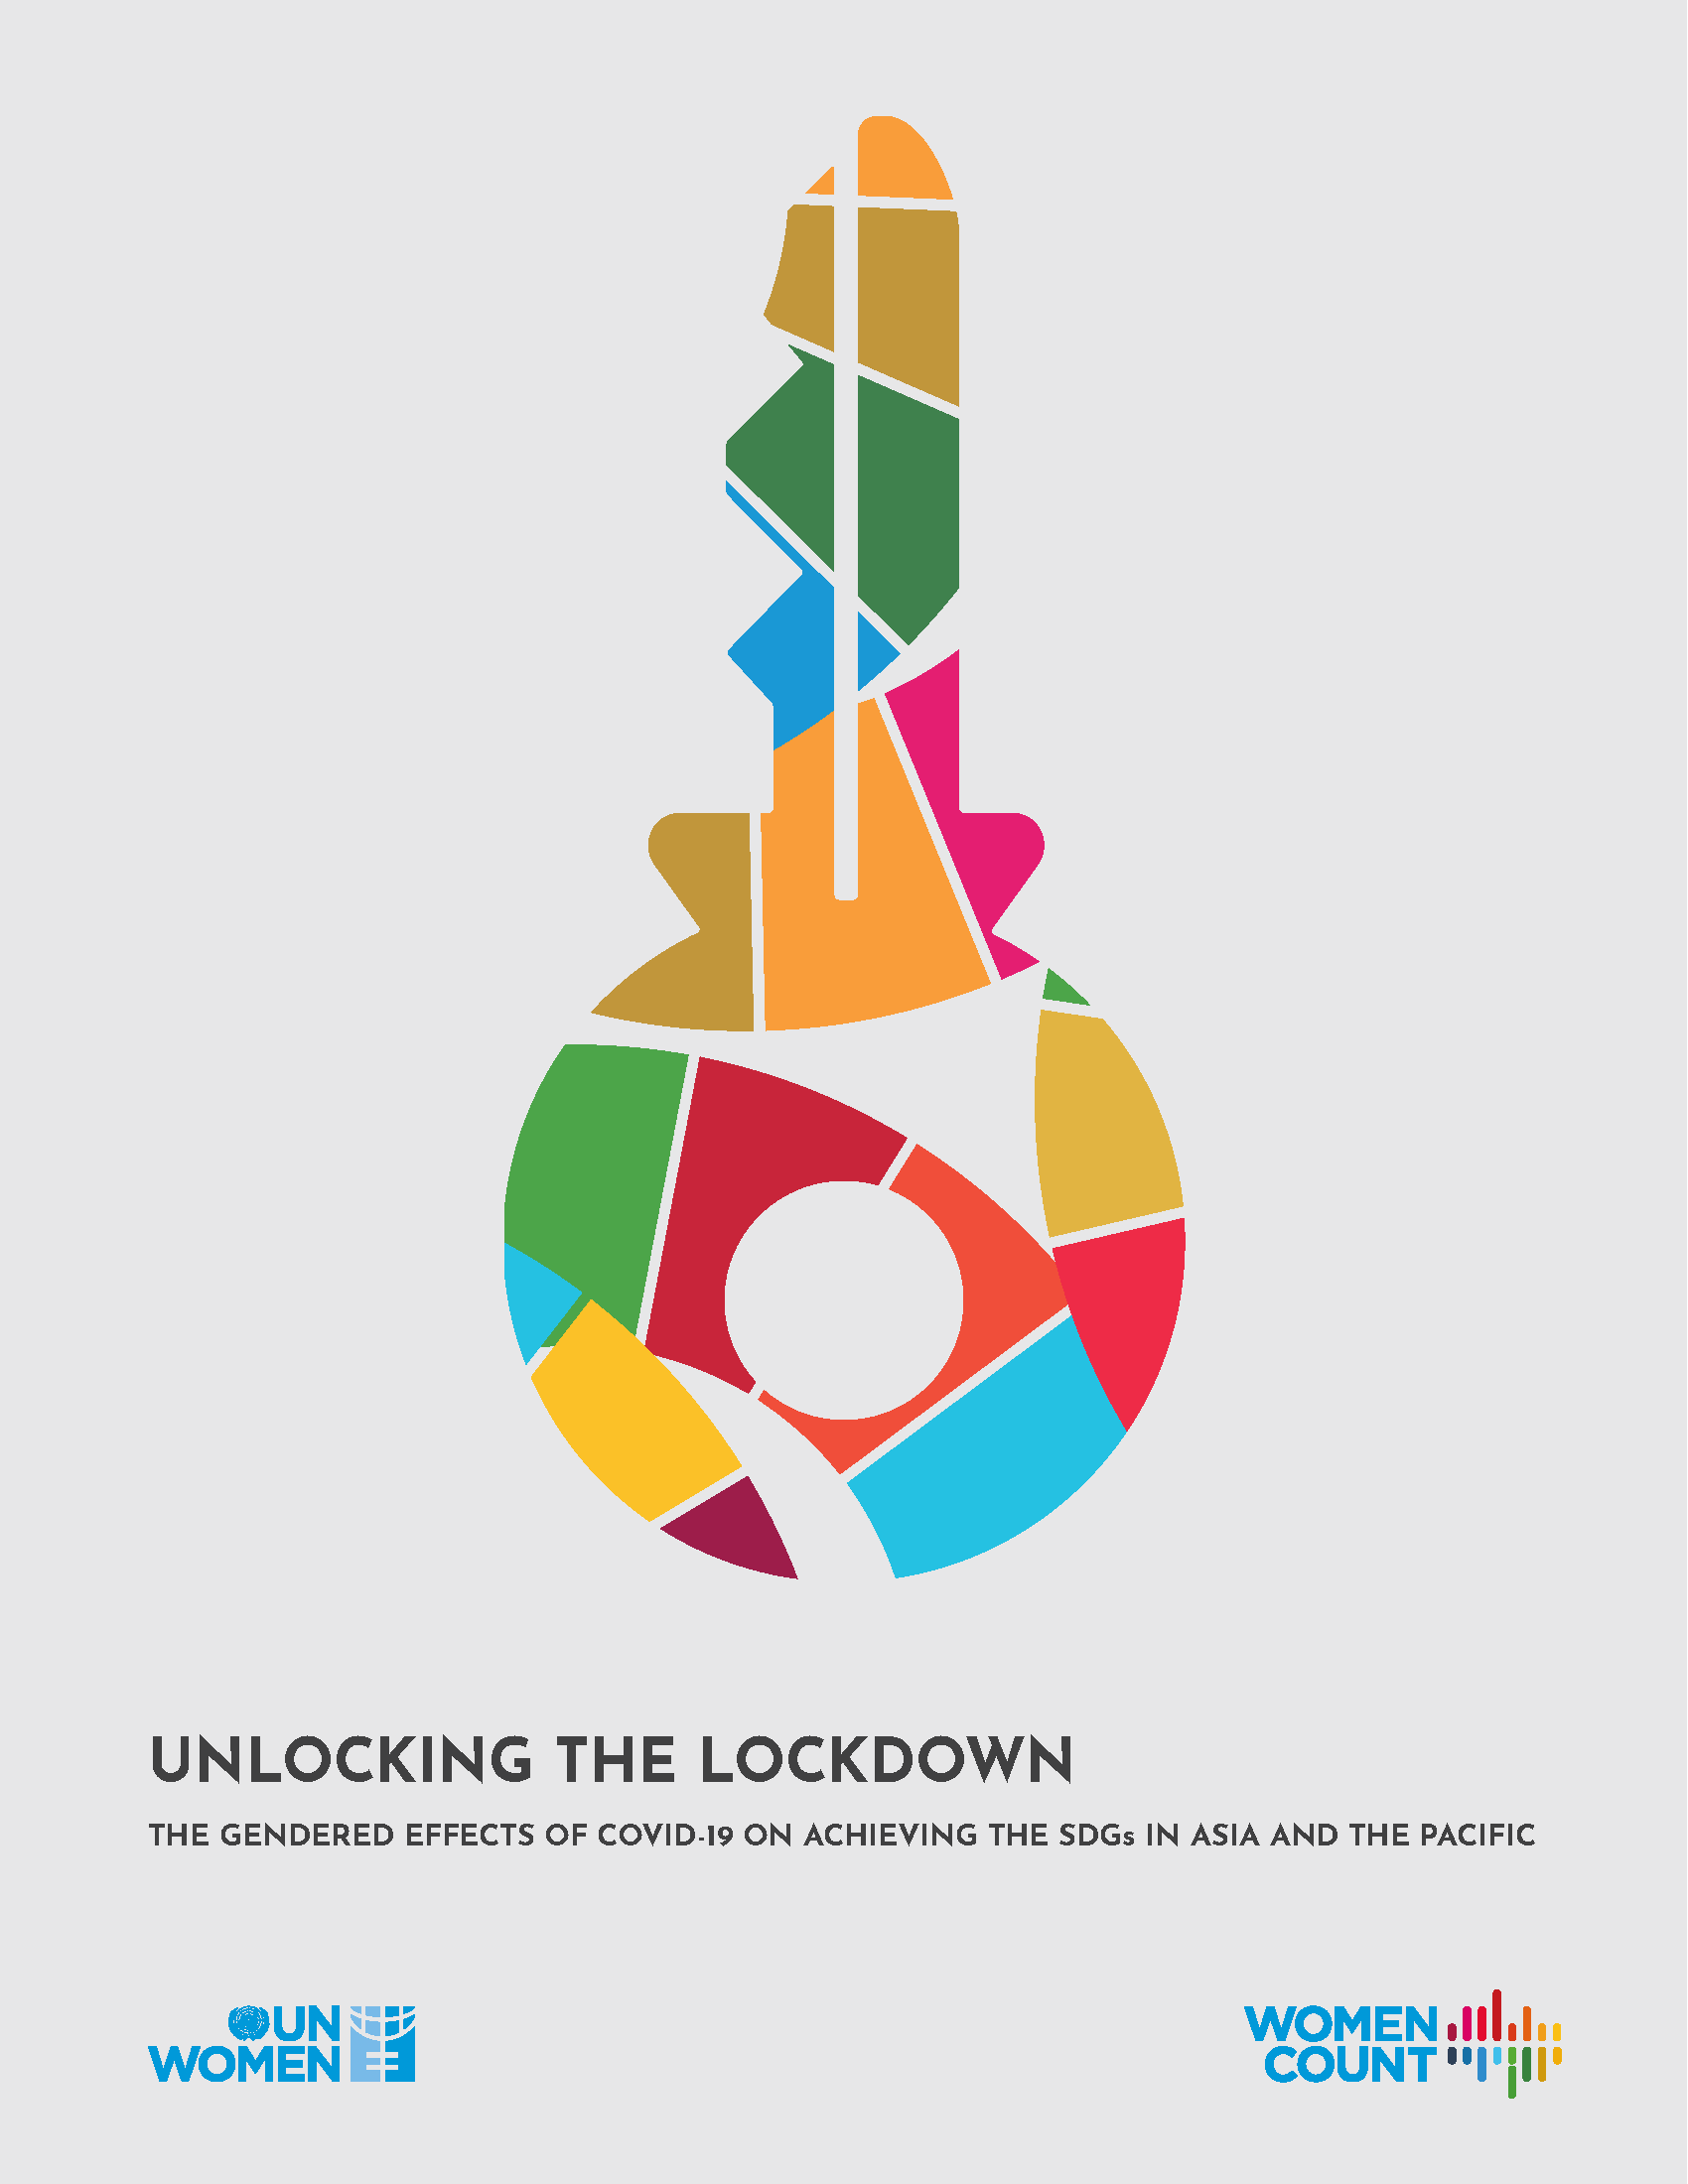 Unlocking the lockdown: The gendered effects of COVID-19 on achieving the SDGS in Asia and the Pacific